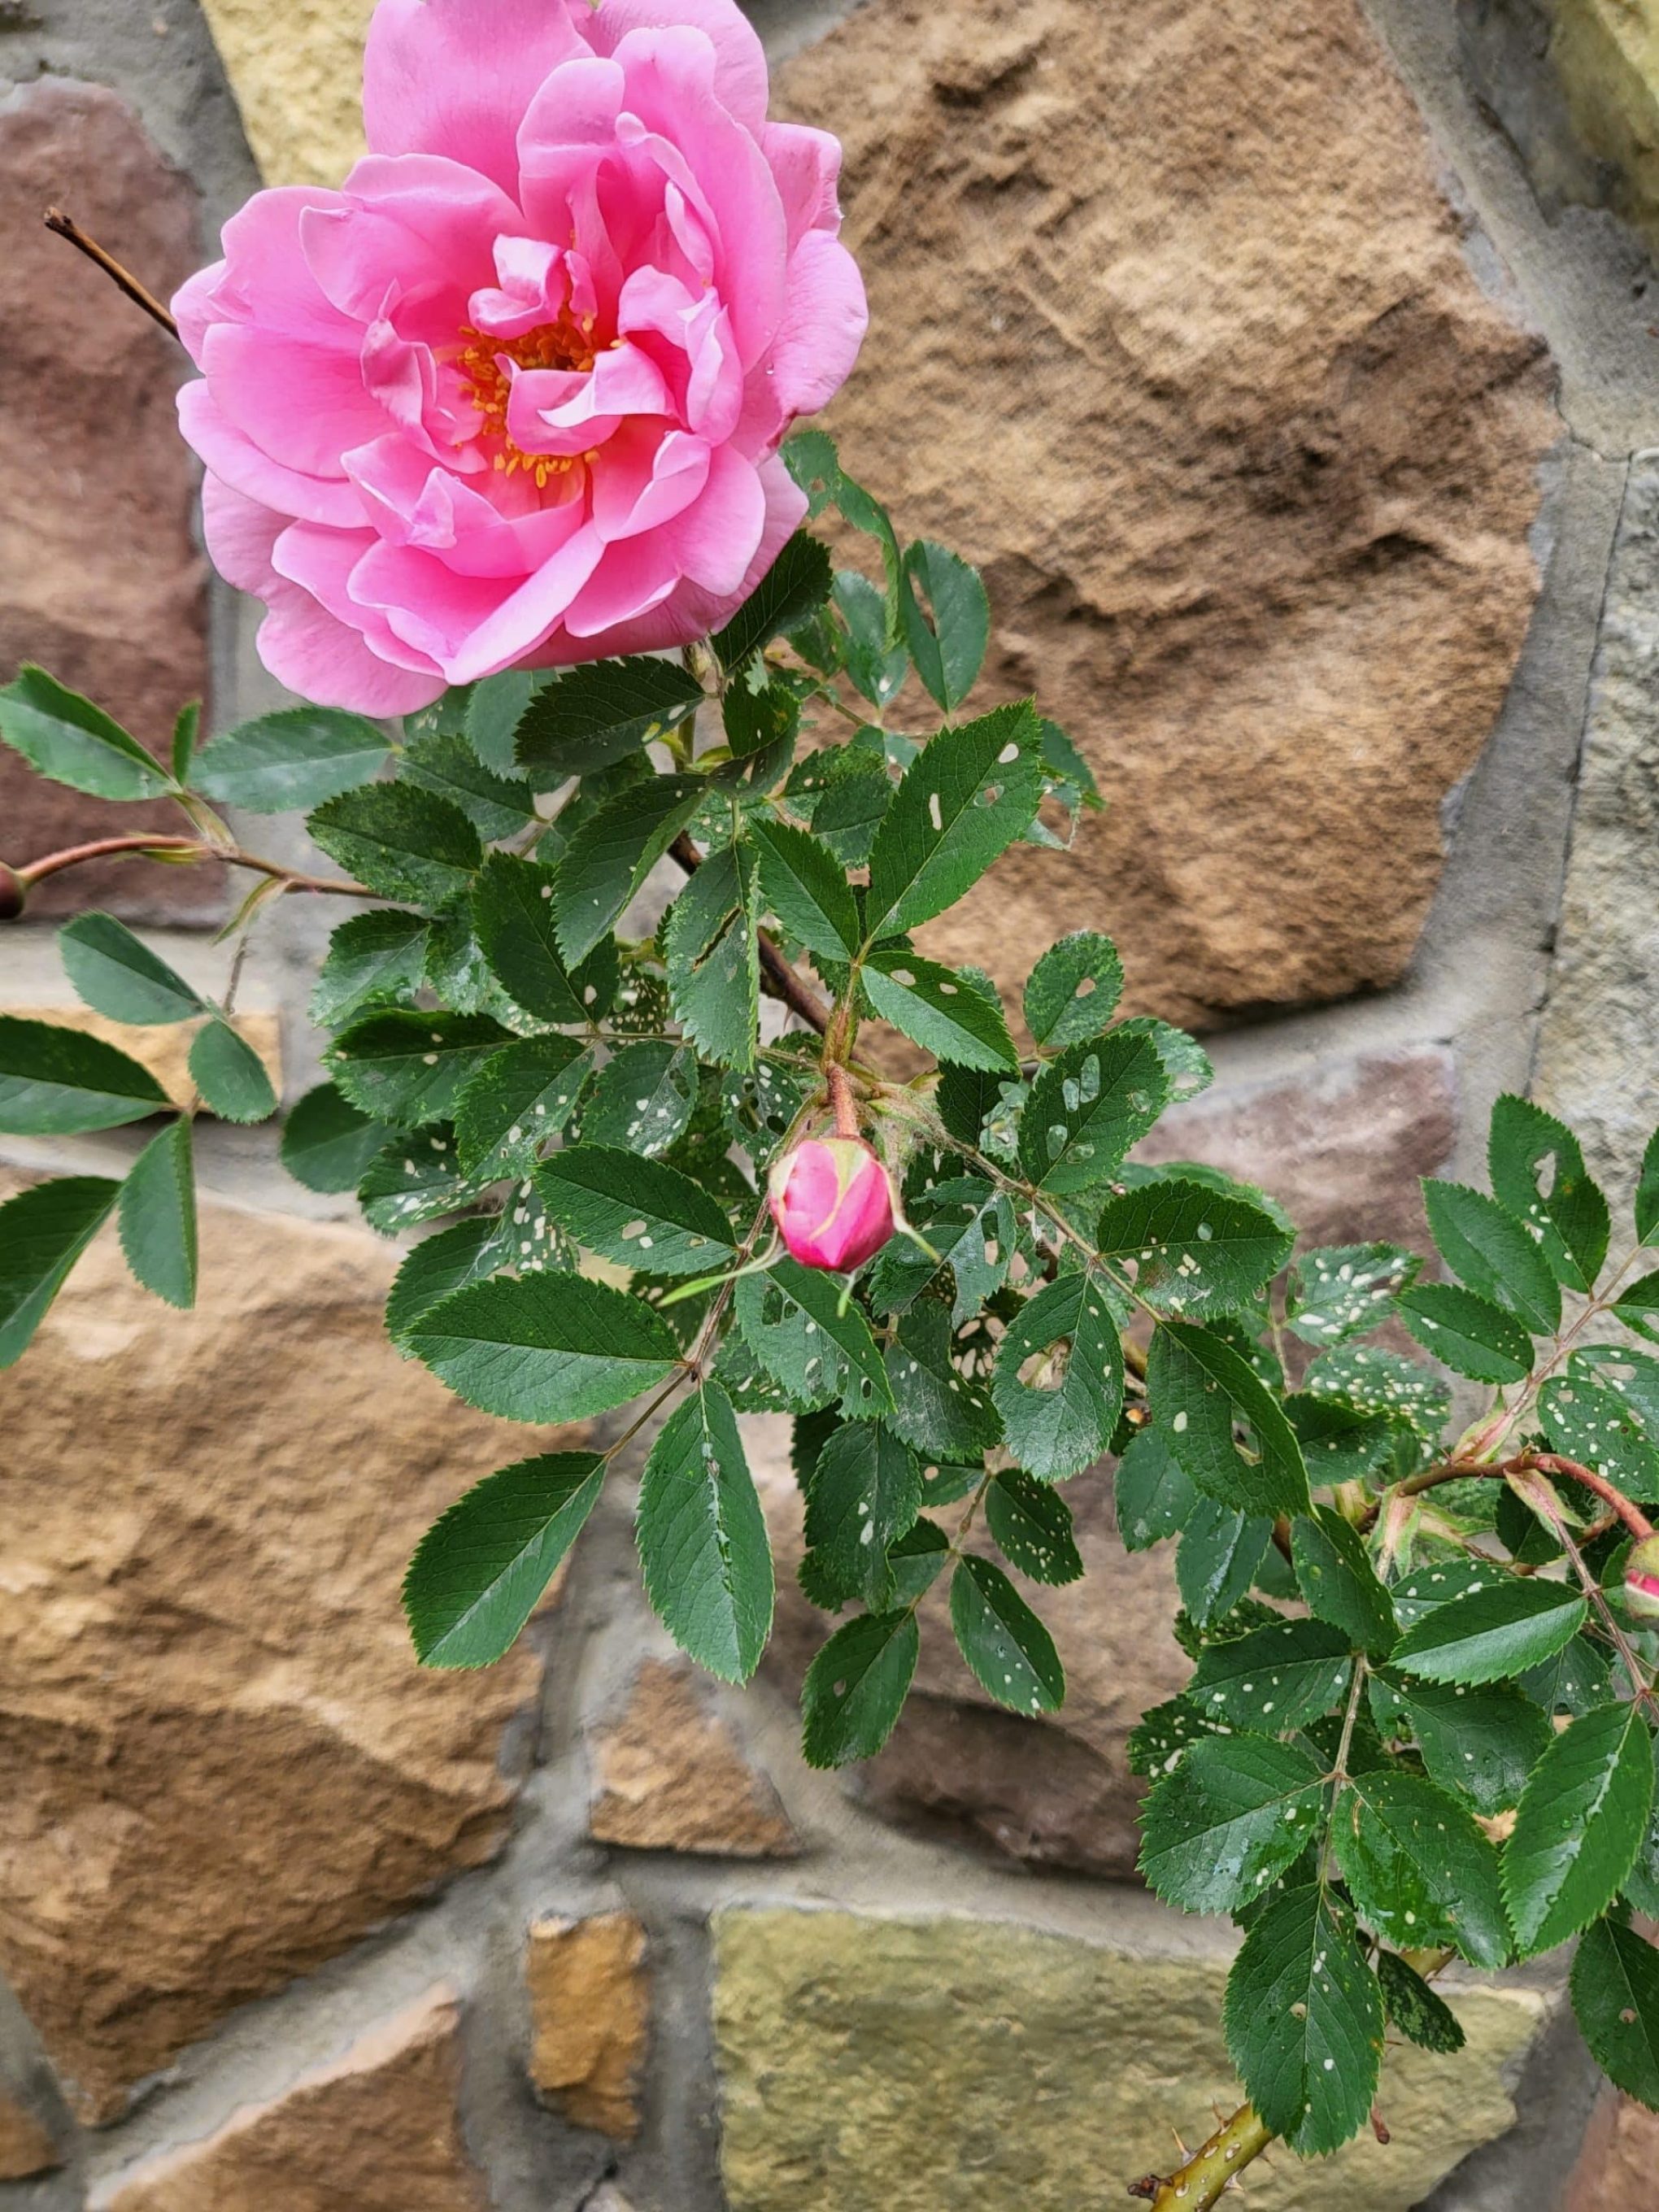 Pink rose in bloom with holy, white spotted leaves - rose slugs, sawfly larvae | Salisbury Greenhouse - Sherwood Park